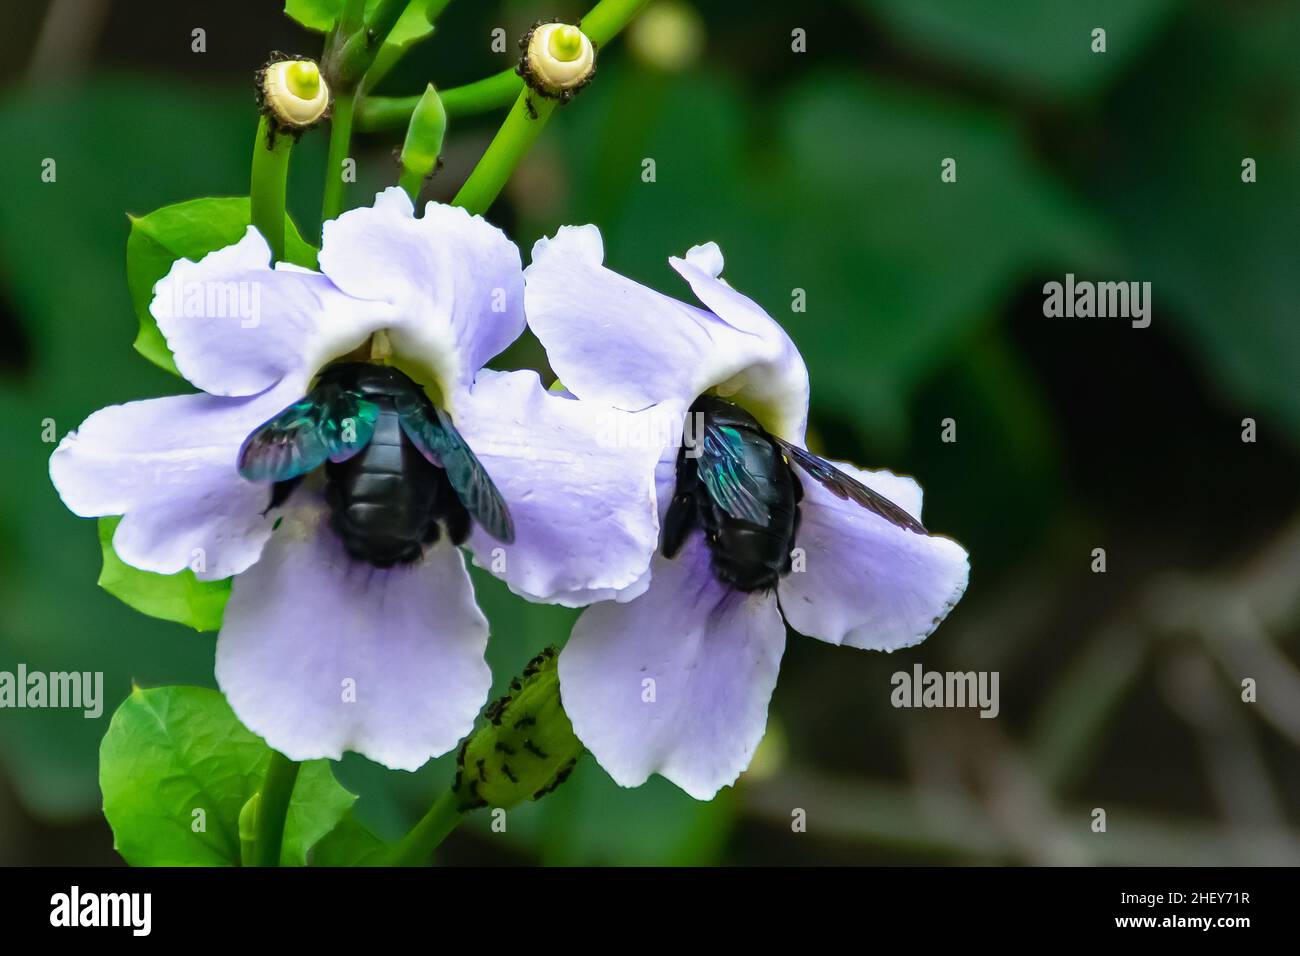 two of carpenter bees suck the honey from the nectar of blooming purple flower with blurry and soft focus nature background Stock Photo